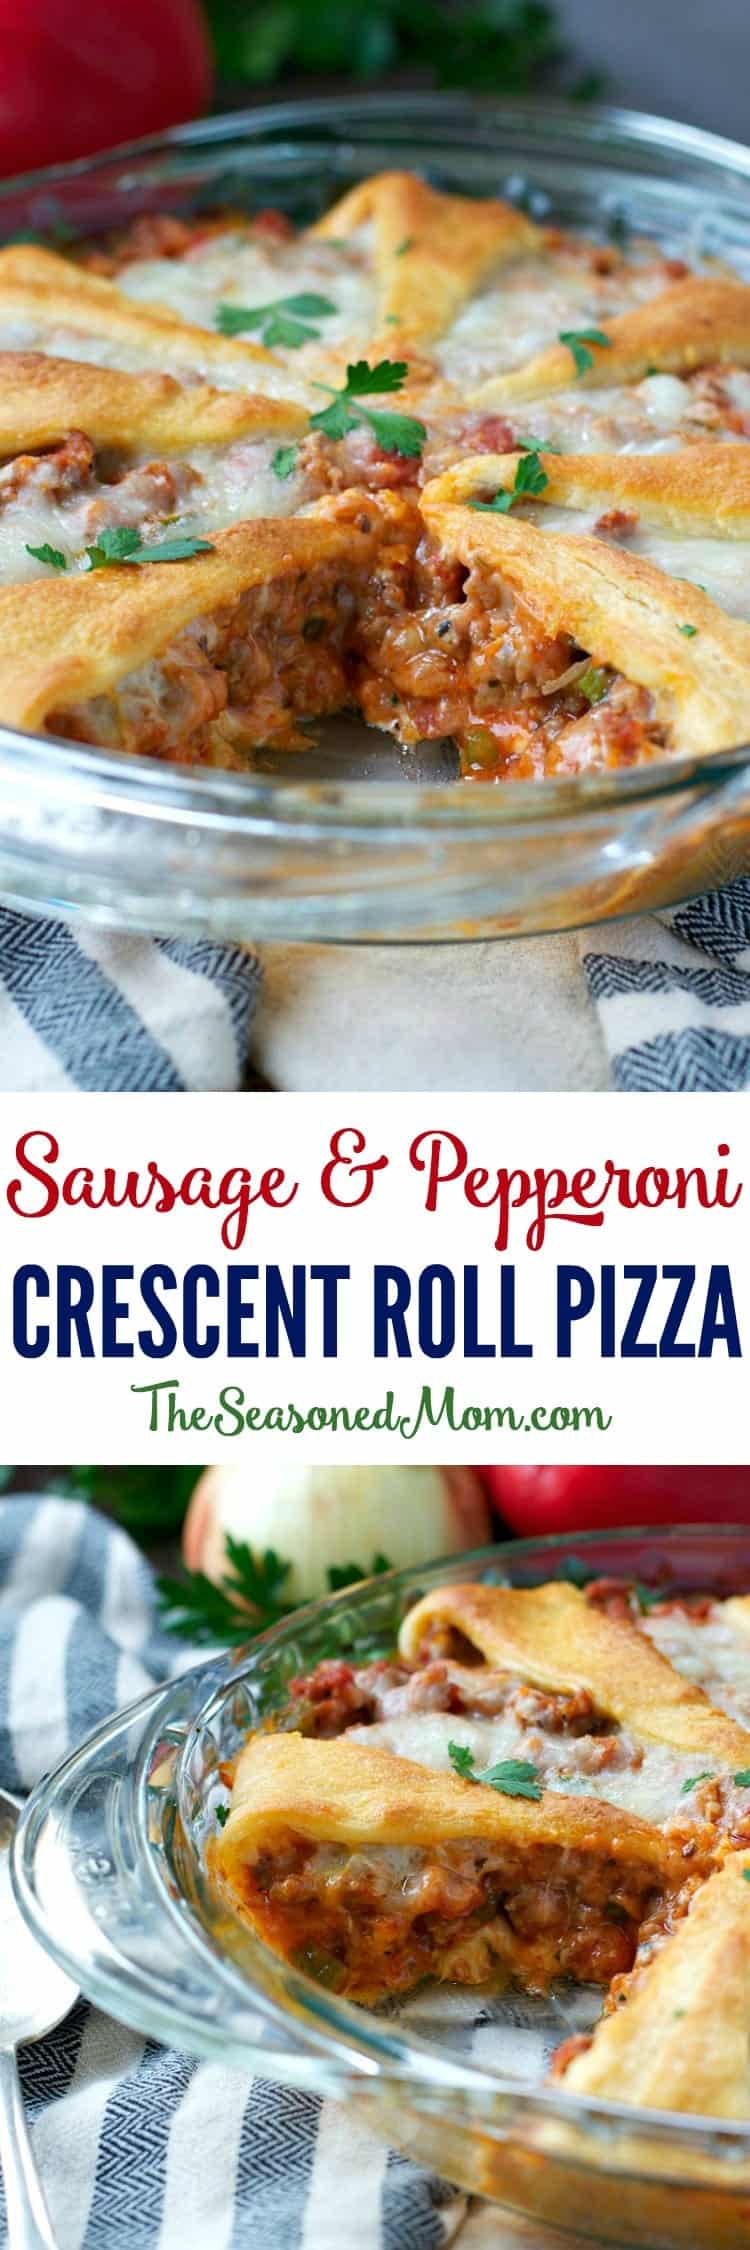 Sausage and Pepperoni Crescent Roll Pizza - The Seasoned Mom